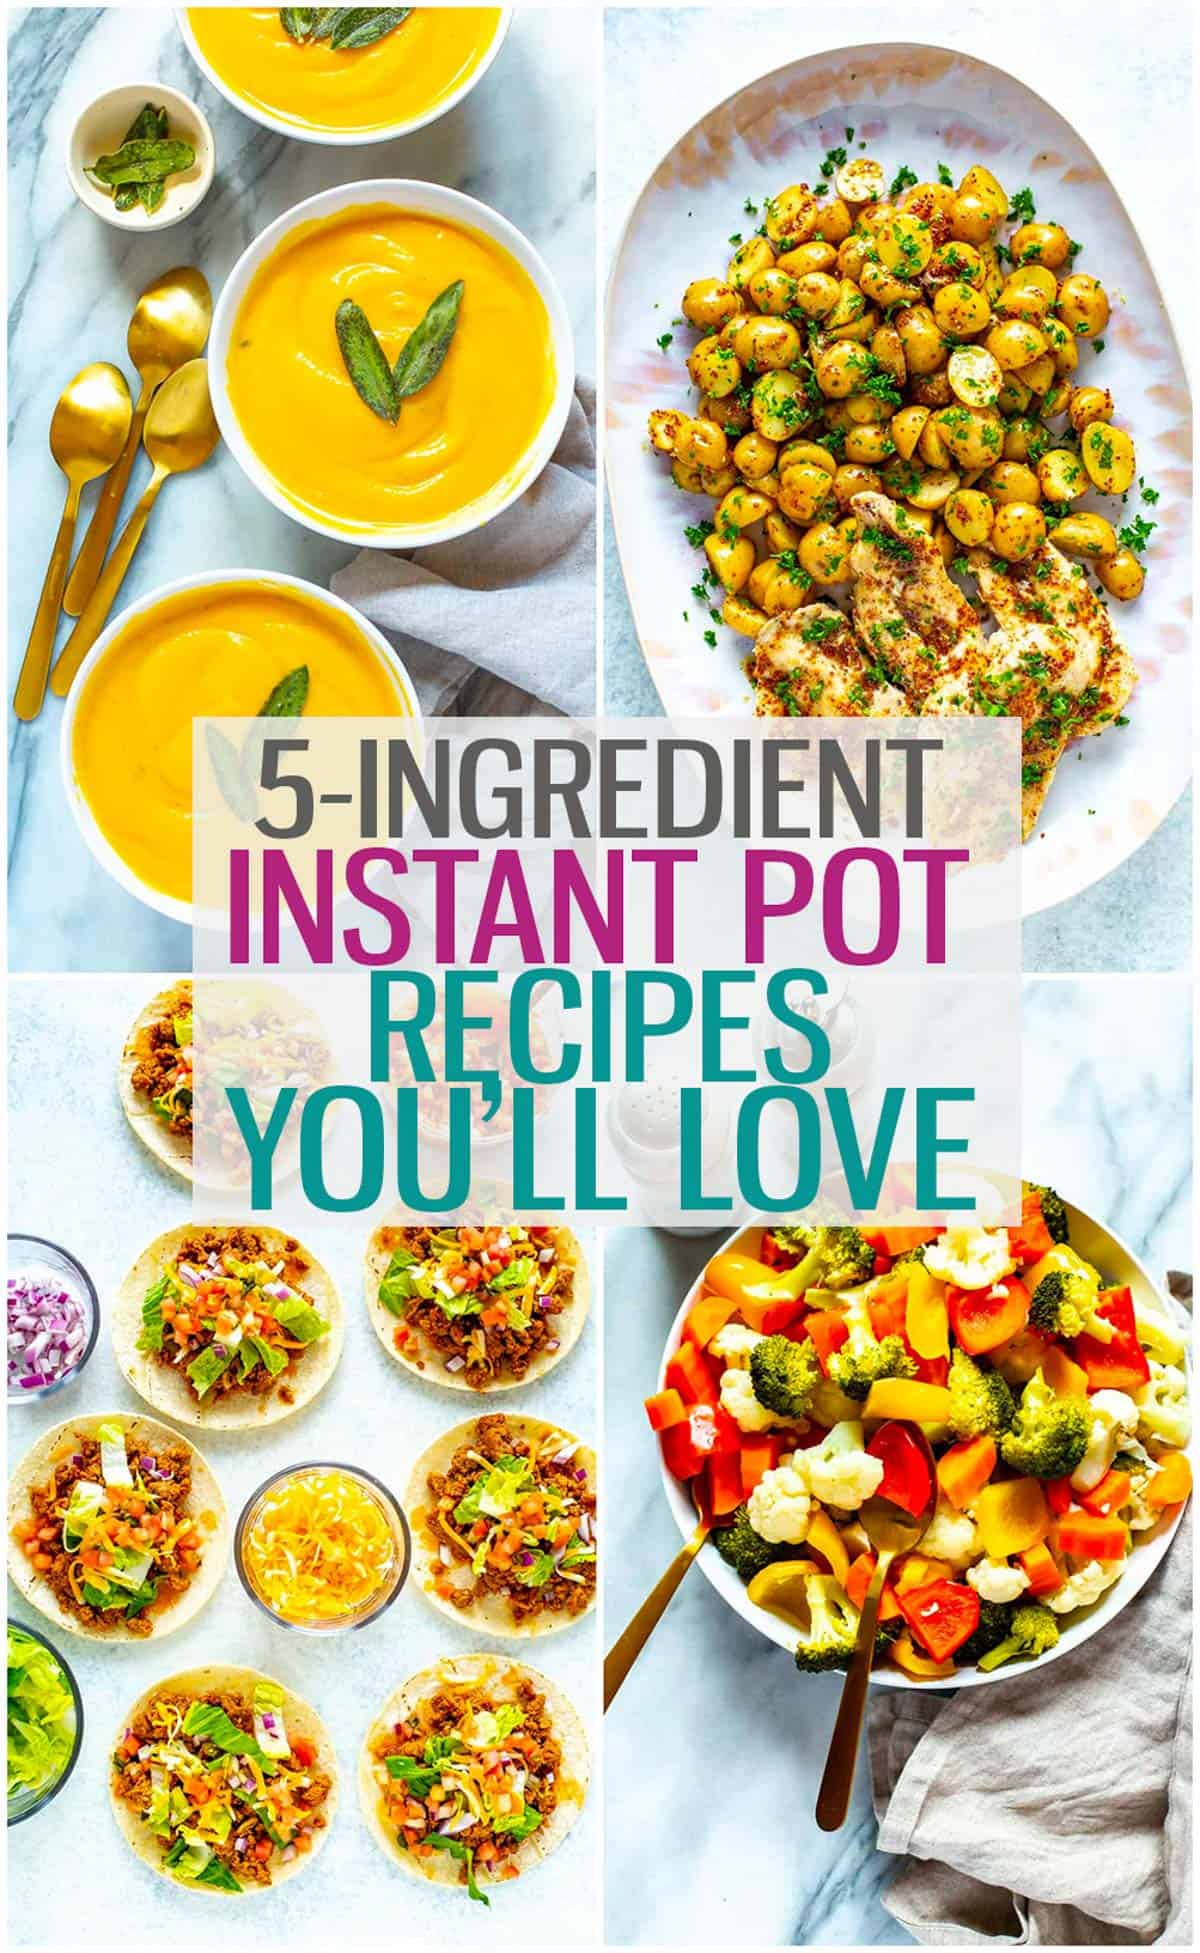 A collage of 4 Instant Pot recipes that require 5 ingredients or less.